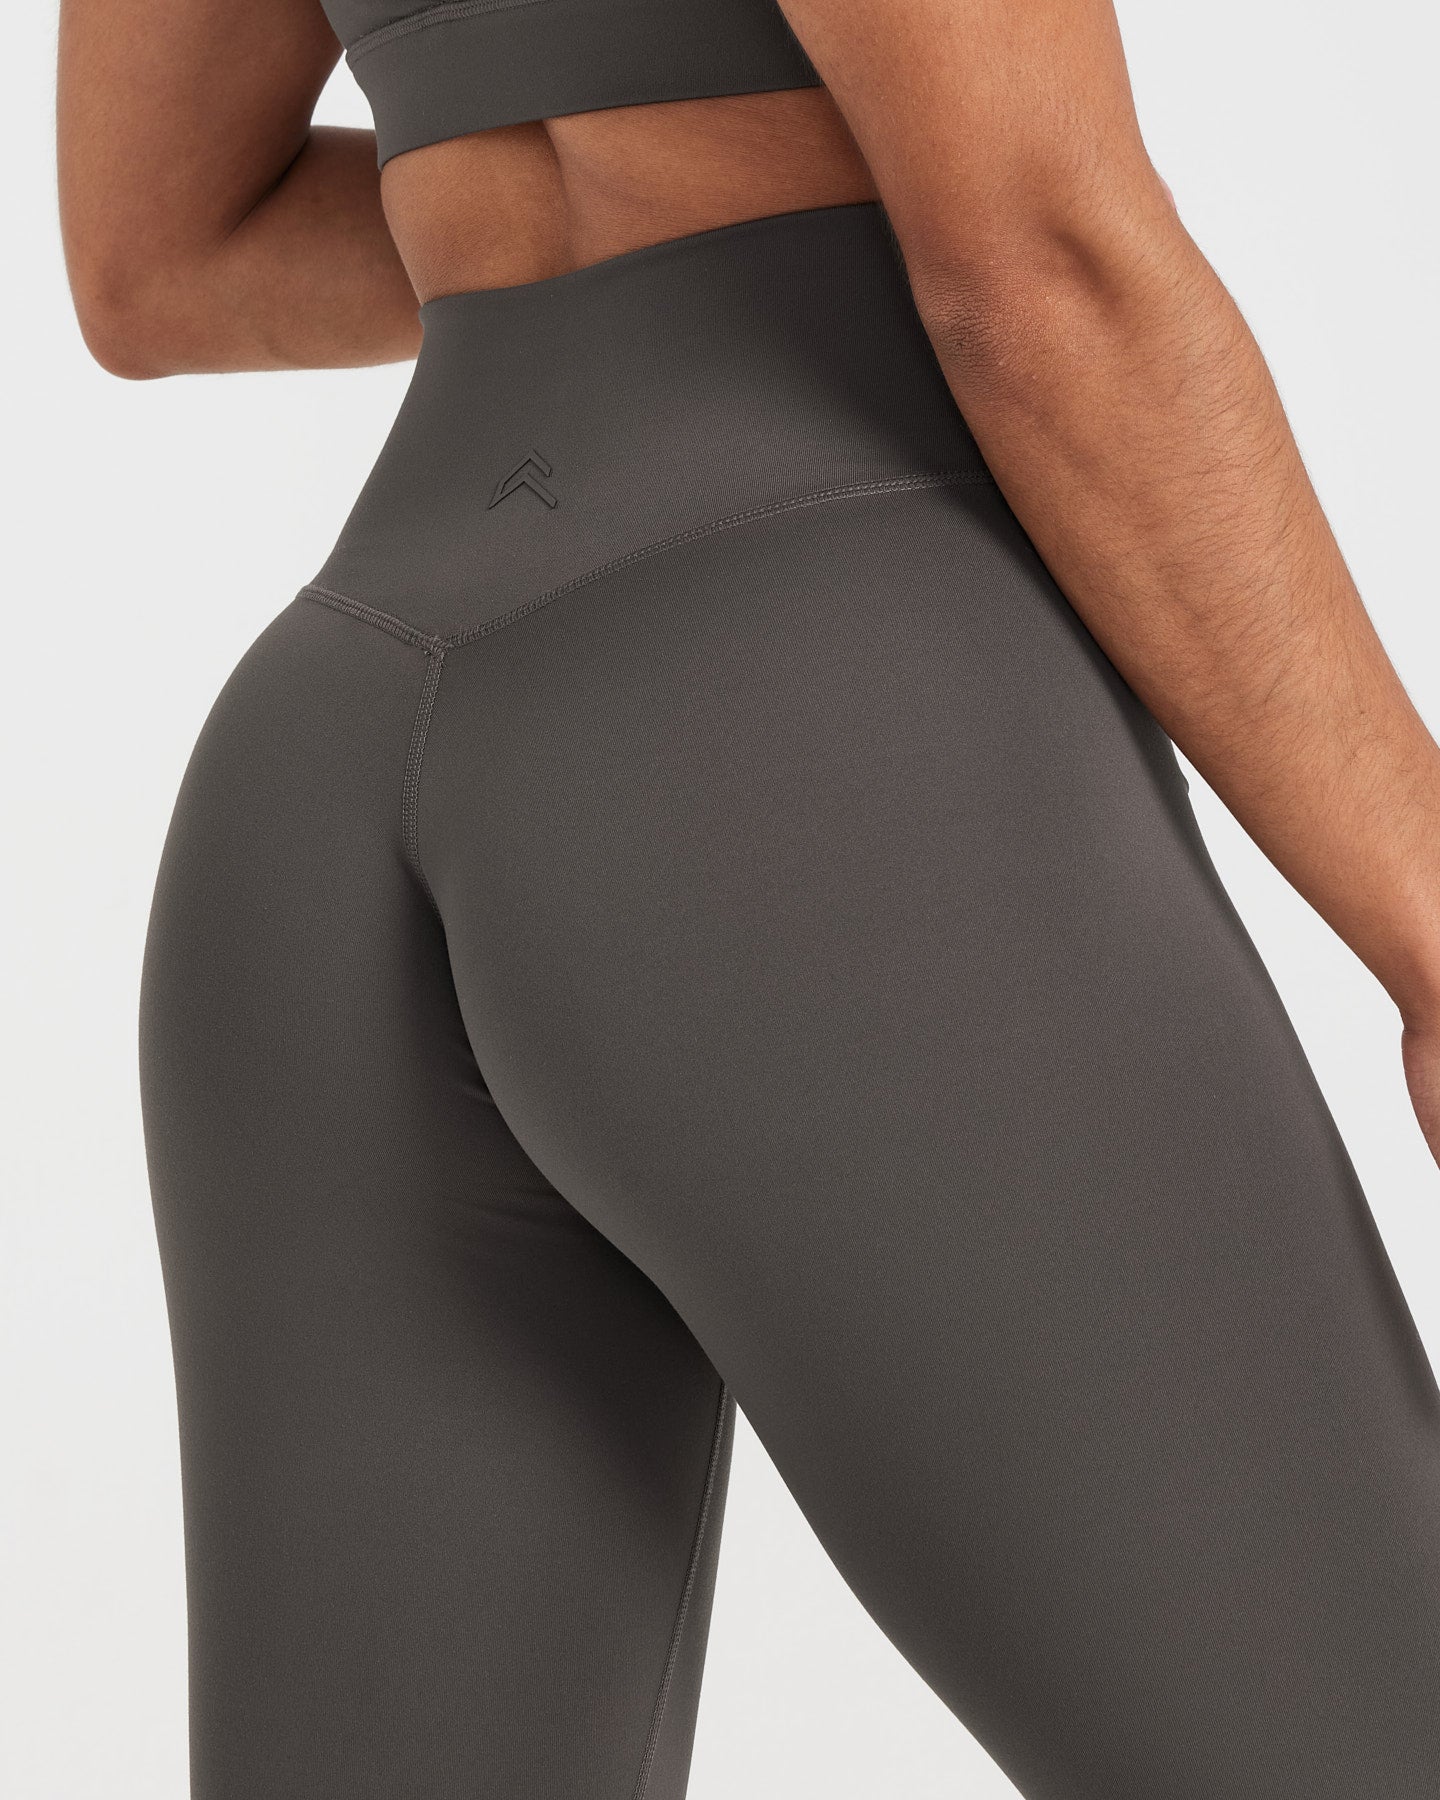 Leggings: A Versatile Wardrobe Staple Every Woman Should Own, by  Twillactive